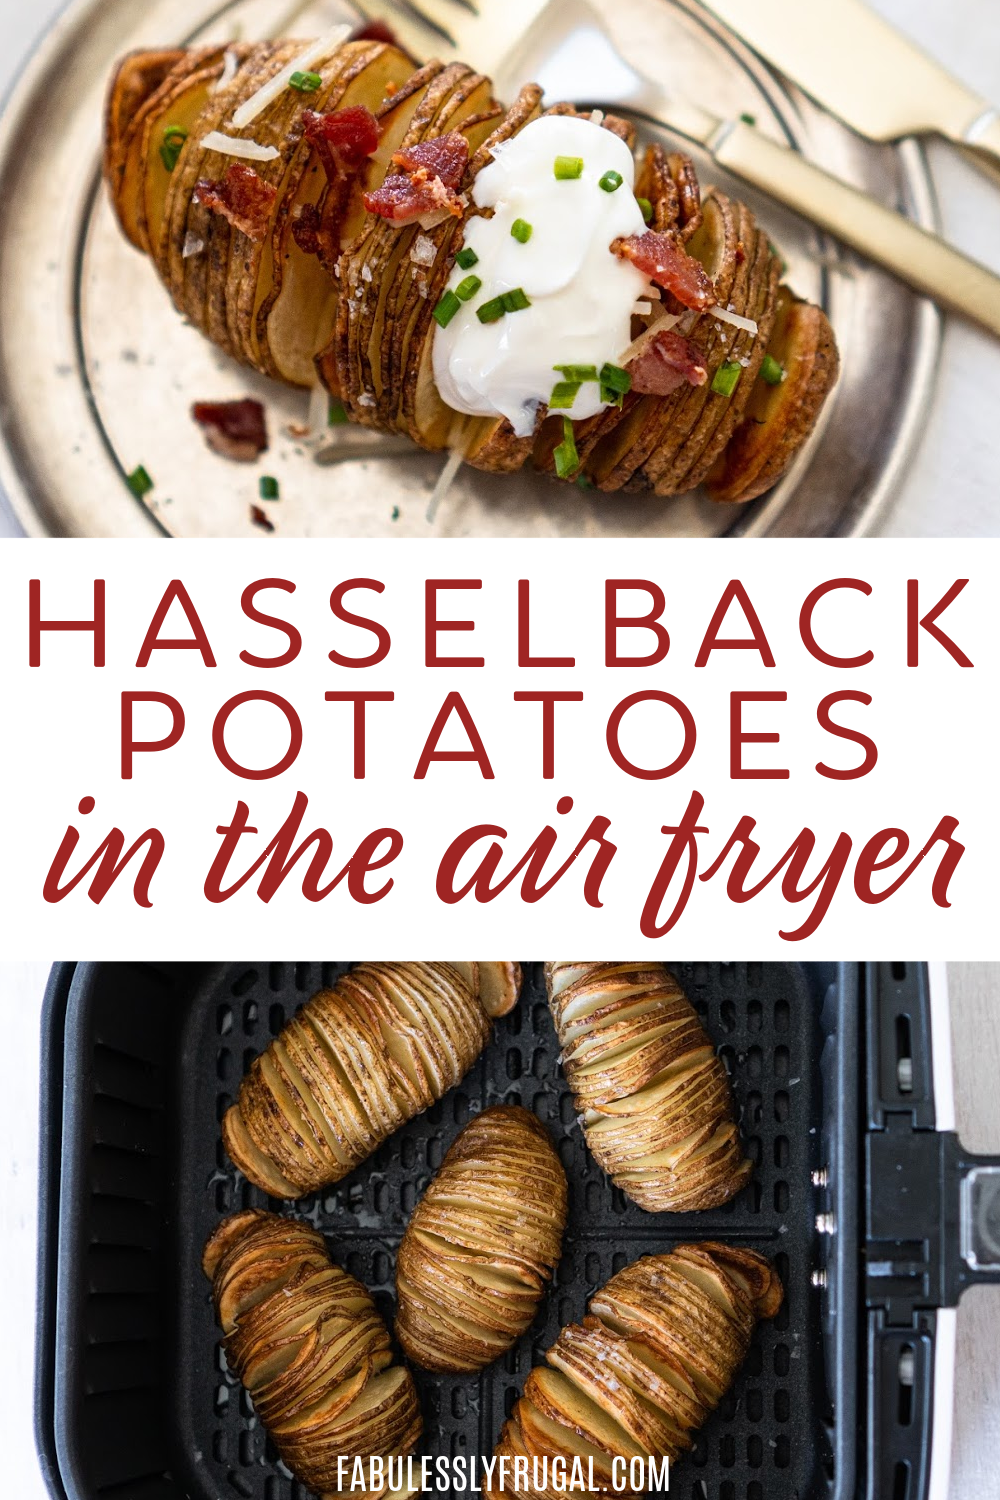 https://fabulesslyfrugal.com/wp-content/uploads/2022/04/how-to-make-hasselback-potatoes-in-the-air-fryer-1.png